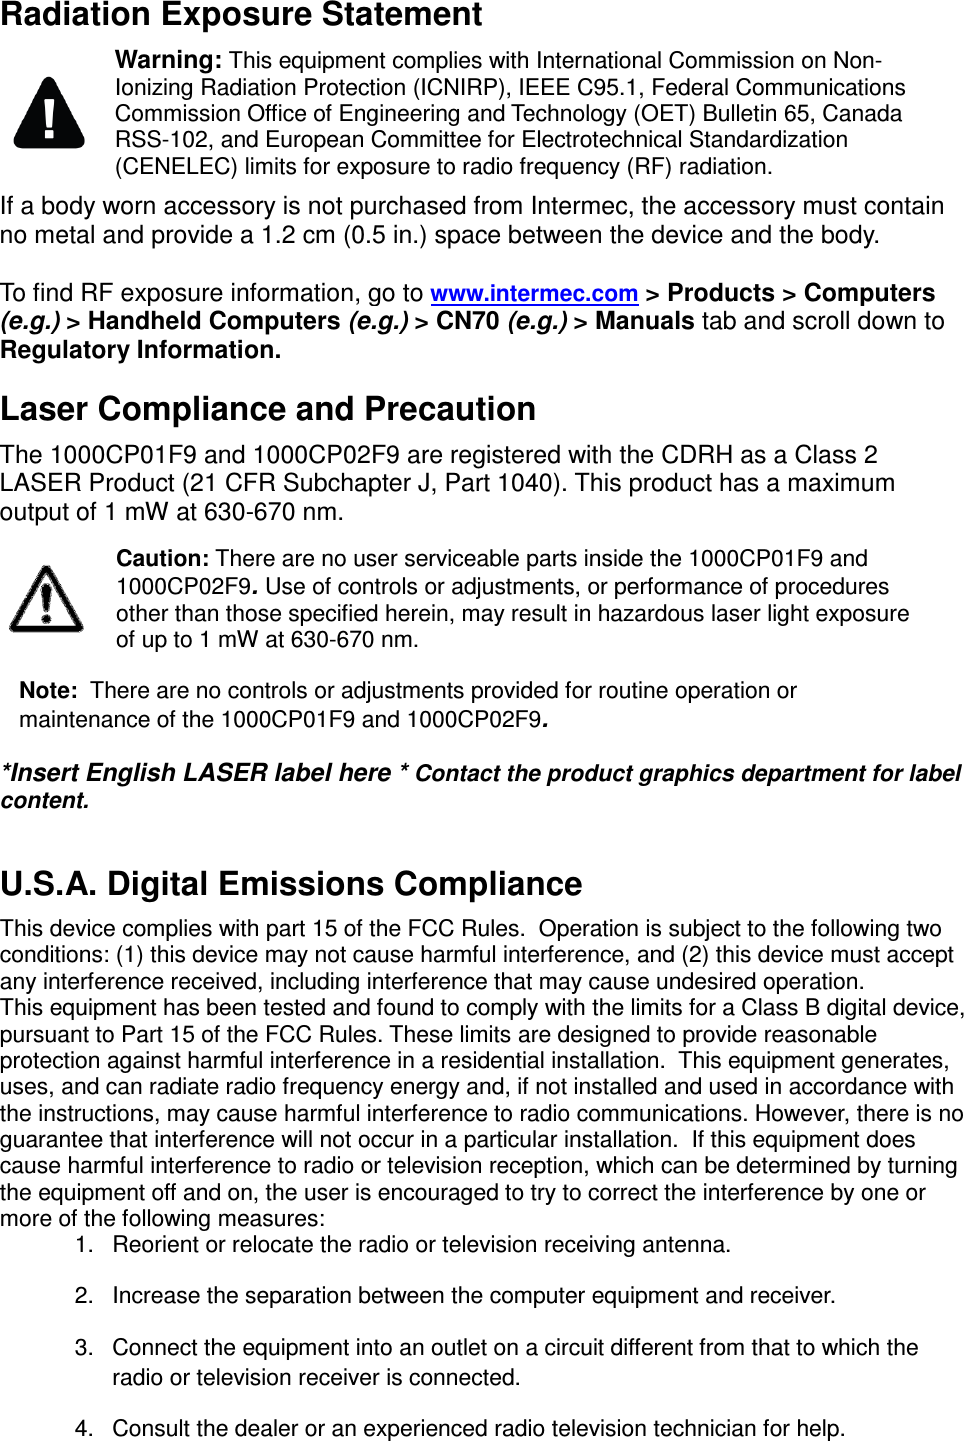  Radiation Exposure Statement  Warning: This equipment complies with International Commission on Non-Ionizing Radiation Protection (ICNIRP), IEEE C95.1, Federal Communications Commission Office of Engineering and Technology (OET) Bulletin 65, Canada RSS-102, and European Committee for Electrotechnical Standardization (CENELEC) limits for exposure to radio frequency (RF) radiation. If a body worn accessory is not purchased from Intermec, the accessory must contain no metal and provide a 1.2 cm (0.5 in.) space between the device and the body.  To find RF exposure information, go to www.intermec.com &gt; Products &gt; Computers  (e.g.) &gt; Handheld Computers (e.g.) &gt; CN70 (e.g.) &gt; Manuals tab and scroll down to Regulatory Information. Laser Compliance and Precaution  The 1000CP01F9 and 1000CP02F9 are registered with the CDRH as a Class 2 LASER Product (21 CFR Subchapter J, Part 1040). This product has a maximum output of 1 mW at 630-670 nm.  Caution: There are no user serviceable parts inside the 1000CP01F9 and 1000CP02F9. Use of controls or adjustments, or performance of procedures other than those specified herein, may result in hazardous laser light exposure of up to 1 mW at 630-670 nm. Note:  There are no controls or adjustments provided for routine operation or maintenance of the 1000CP01F9 and 1000CP02F9. *Insert English LASER label here * Contact the product graphics department for label content.  U.S.A. Digital Emissions Compliance  This device complies with part 15 of the FCC Rules.  Operation is subject to the following two conditions: (1) this device may not cause harmful interference, and (2) this device must accept any interference received, including interference that may cause undesired operation. This equipment has been tested and found to comply with the limits for a Class B digital device, pursuant to Part 15 of the FCC Rules. These limits are designed to provide reasonable protection against harmful interference in a residential installation.  This equipment generates, uses, and can radiate radio frequency energy and, if not installed and used in accordance with the instructions, may cause harmful interference to radio communications. However, there is no guarantee that interference will not occur in a particular installation.  If this equipment does cause harmful interference to radio or television reception, which can be determined by turning the equipment off and on, the user is encouraged to try to correct the interference by one or more of the following measures: 1.  Reorient or relocate the radio or television receiving antenna. 2.  Increase the separation between the computer equipment and receiver. 3.  Connect the equipment into an outlet on a circuit different from that to which the radio or television receiver is connected. 4.  Consult the dealer or an experienced radio television technician for help. 